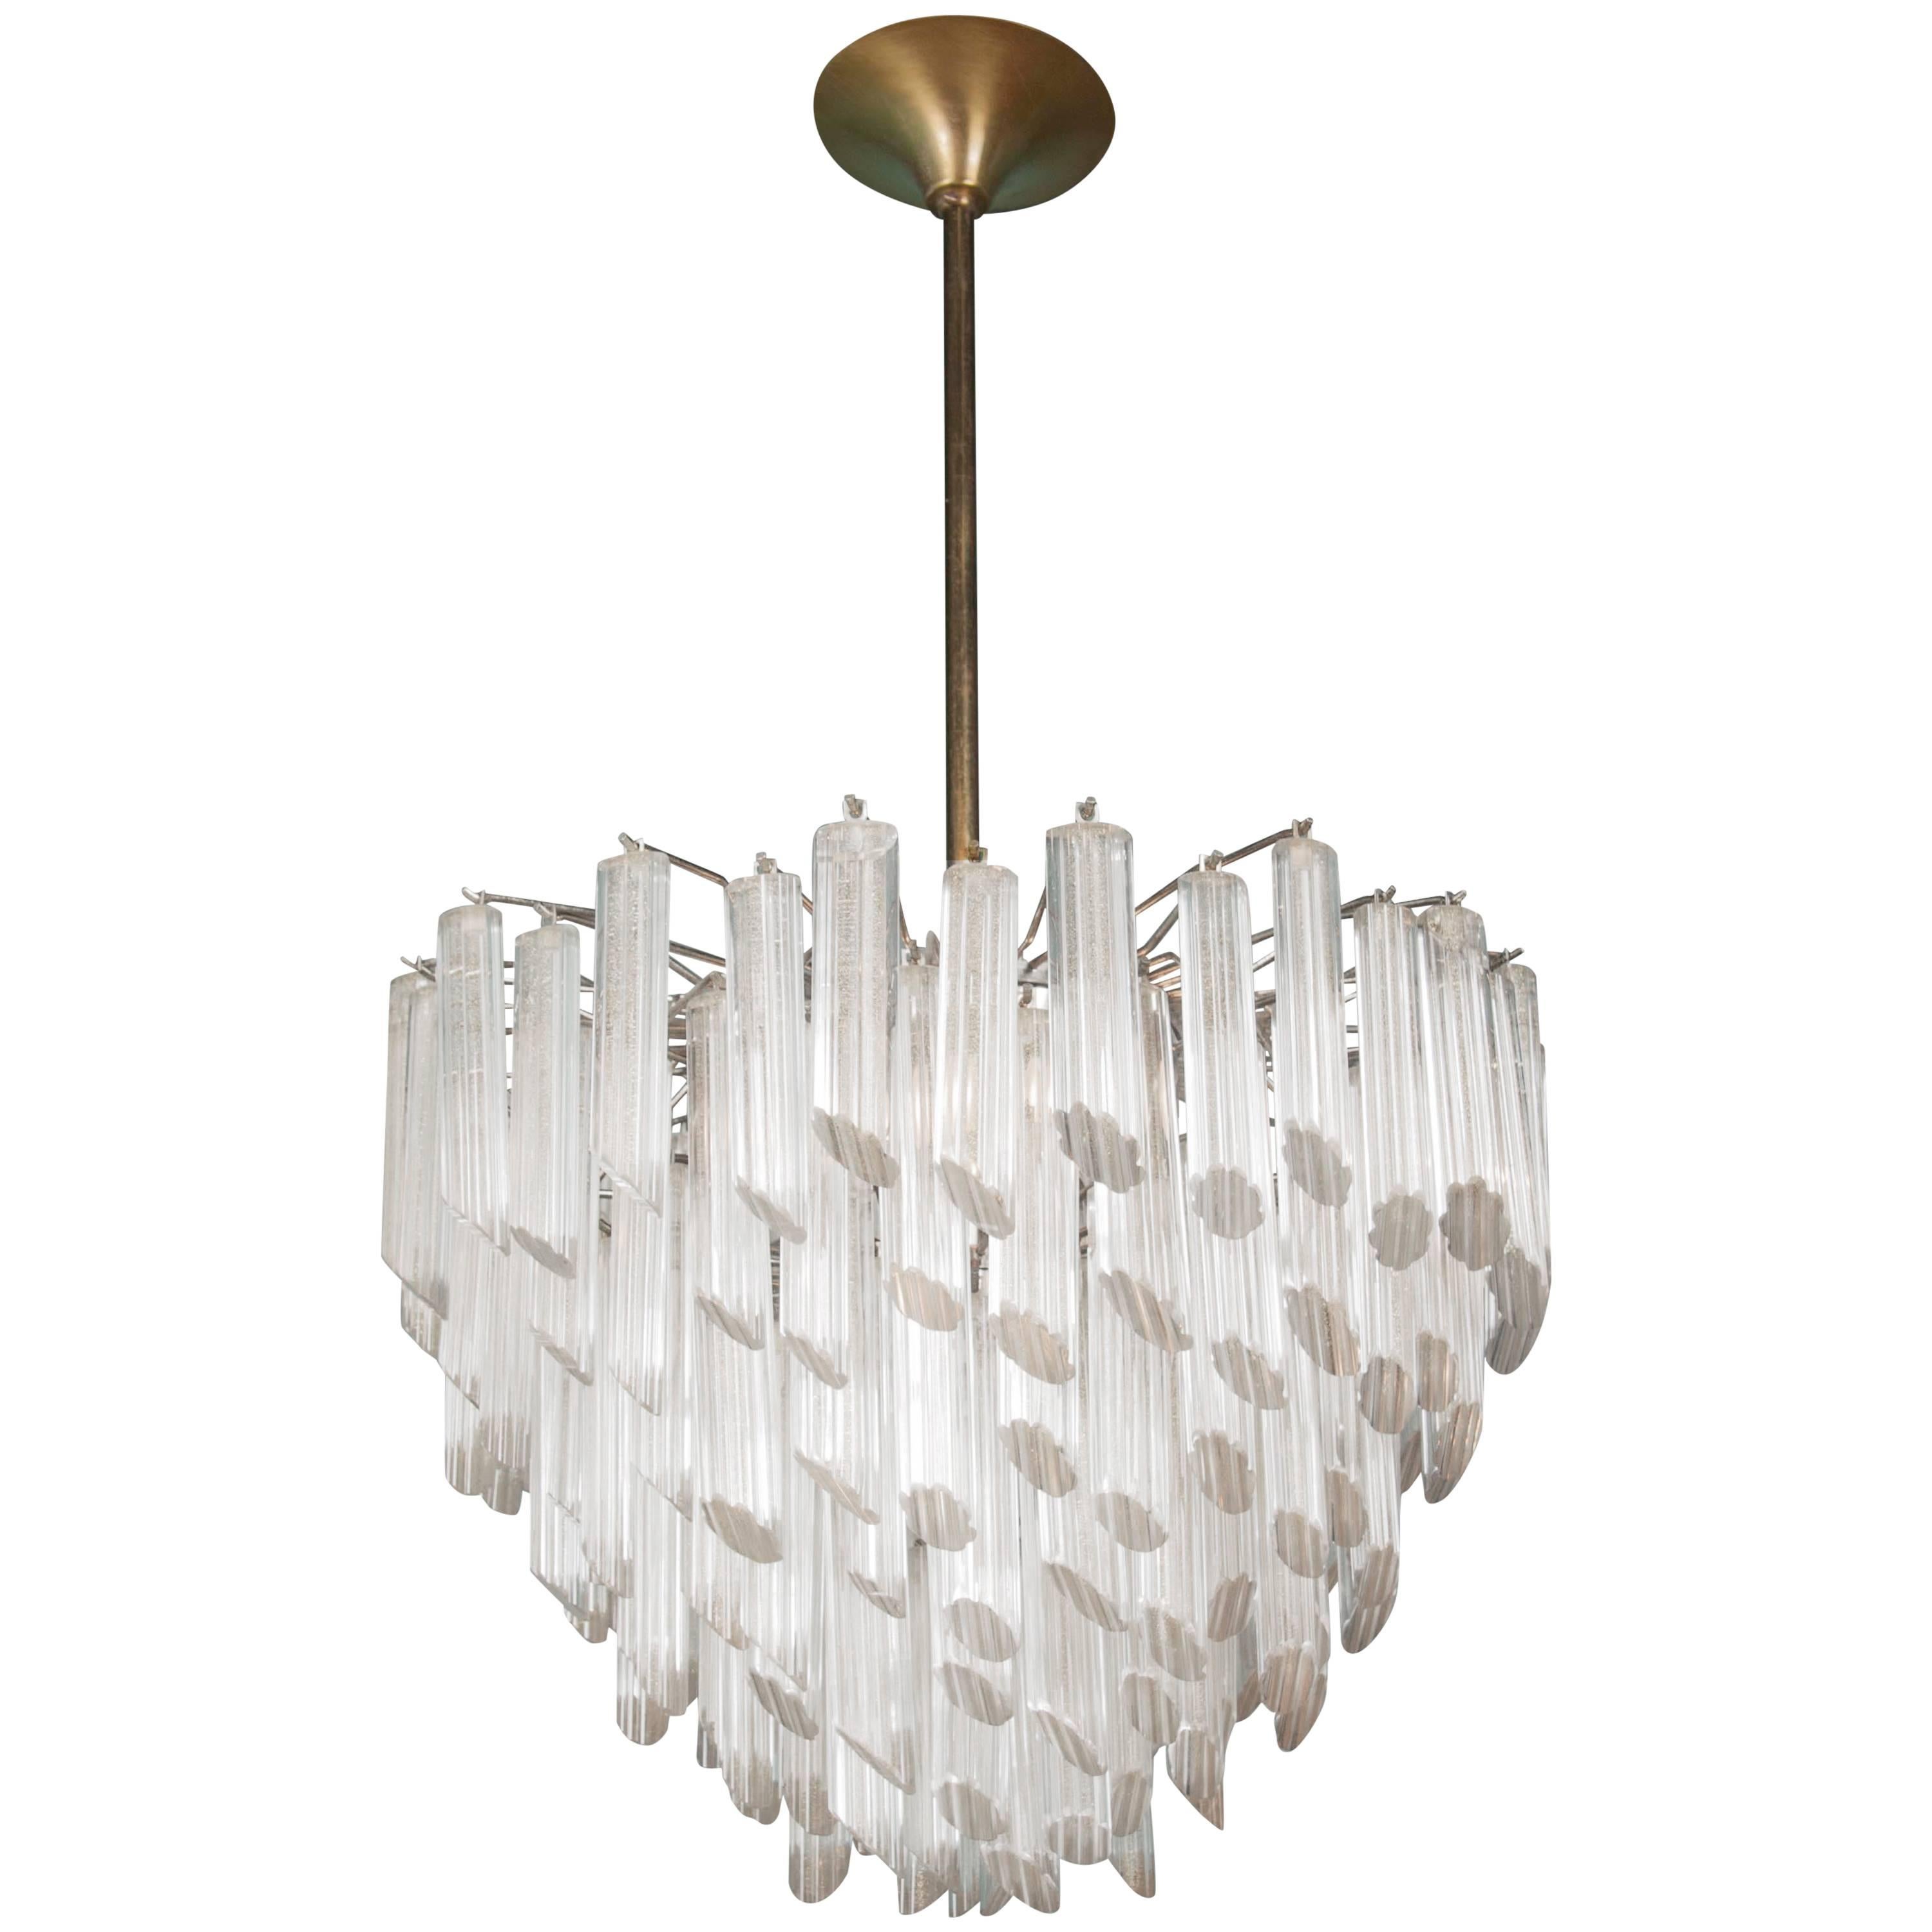 Magnificent Camer Chandelier of Tiered Murano Glass Prisms